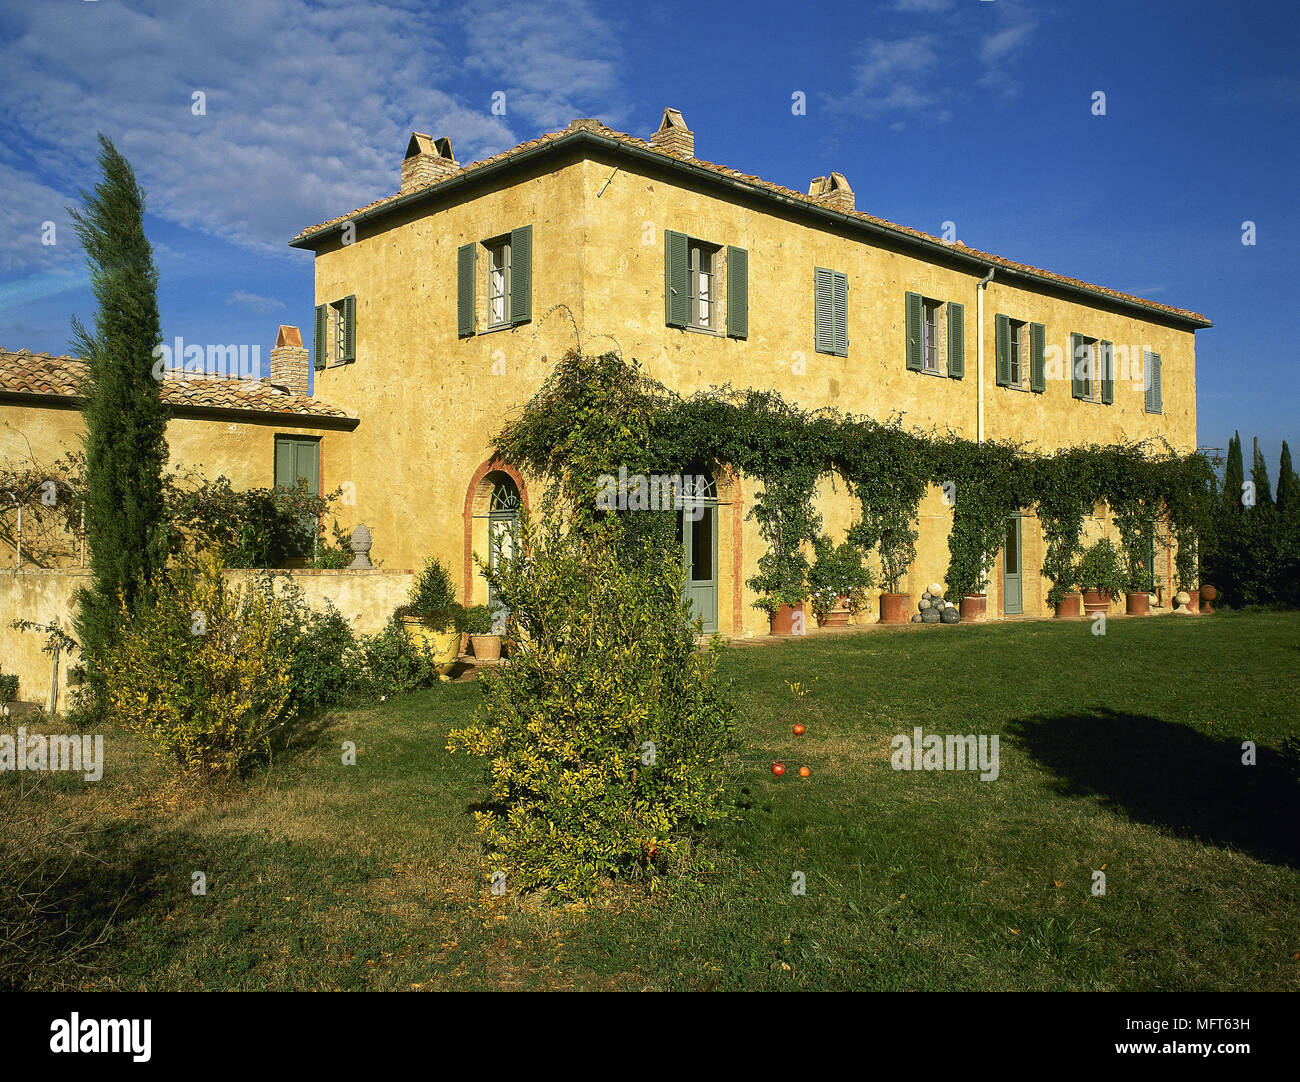 Exterior of a yellow painted Italian villa, window with shutters, Stock Photo